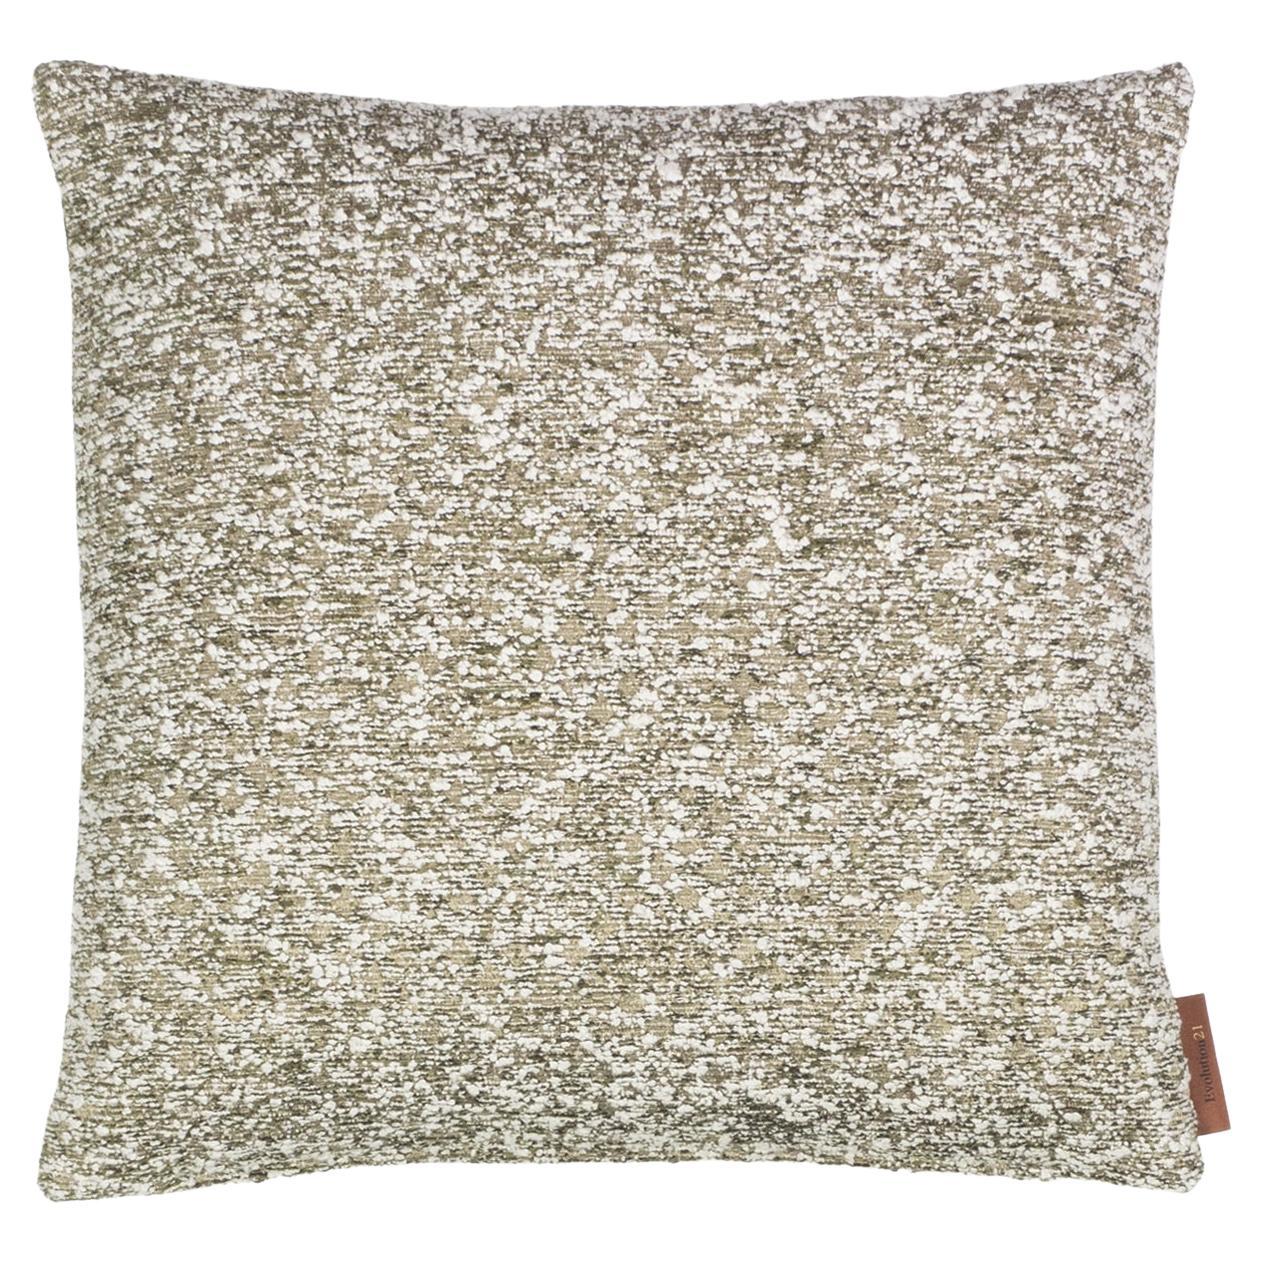 Modern Throw Accented Pillow "Lucca" Pistache Brown Grey by Evolution21